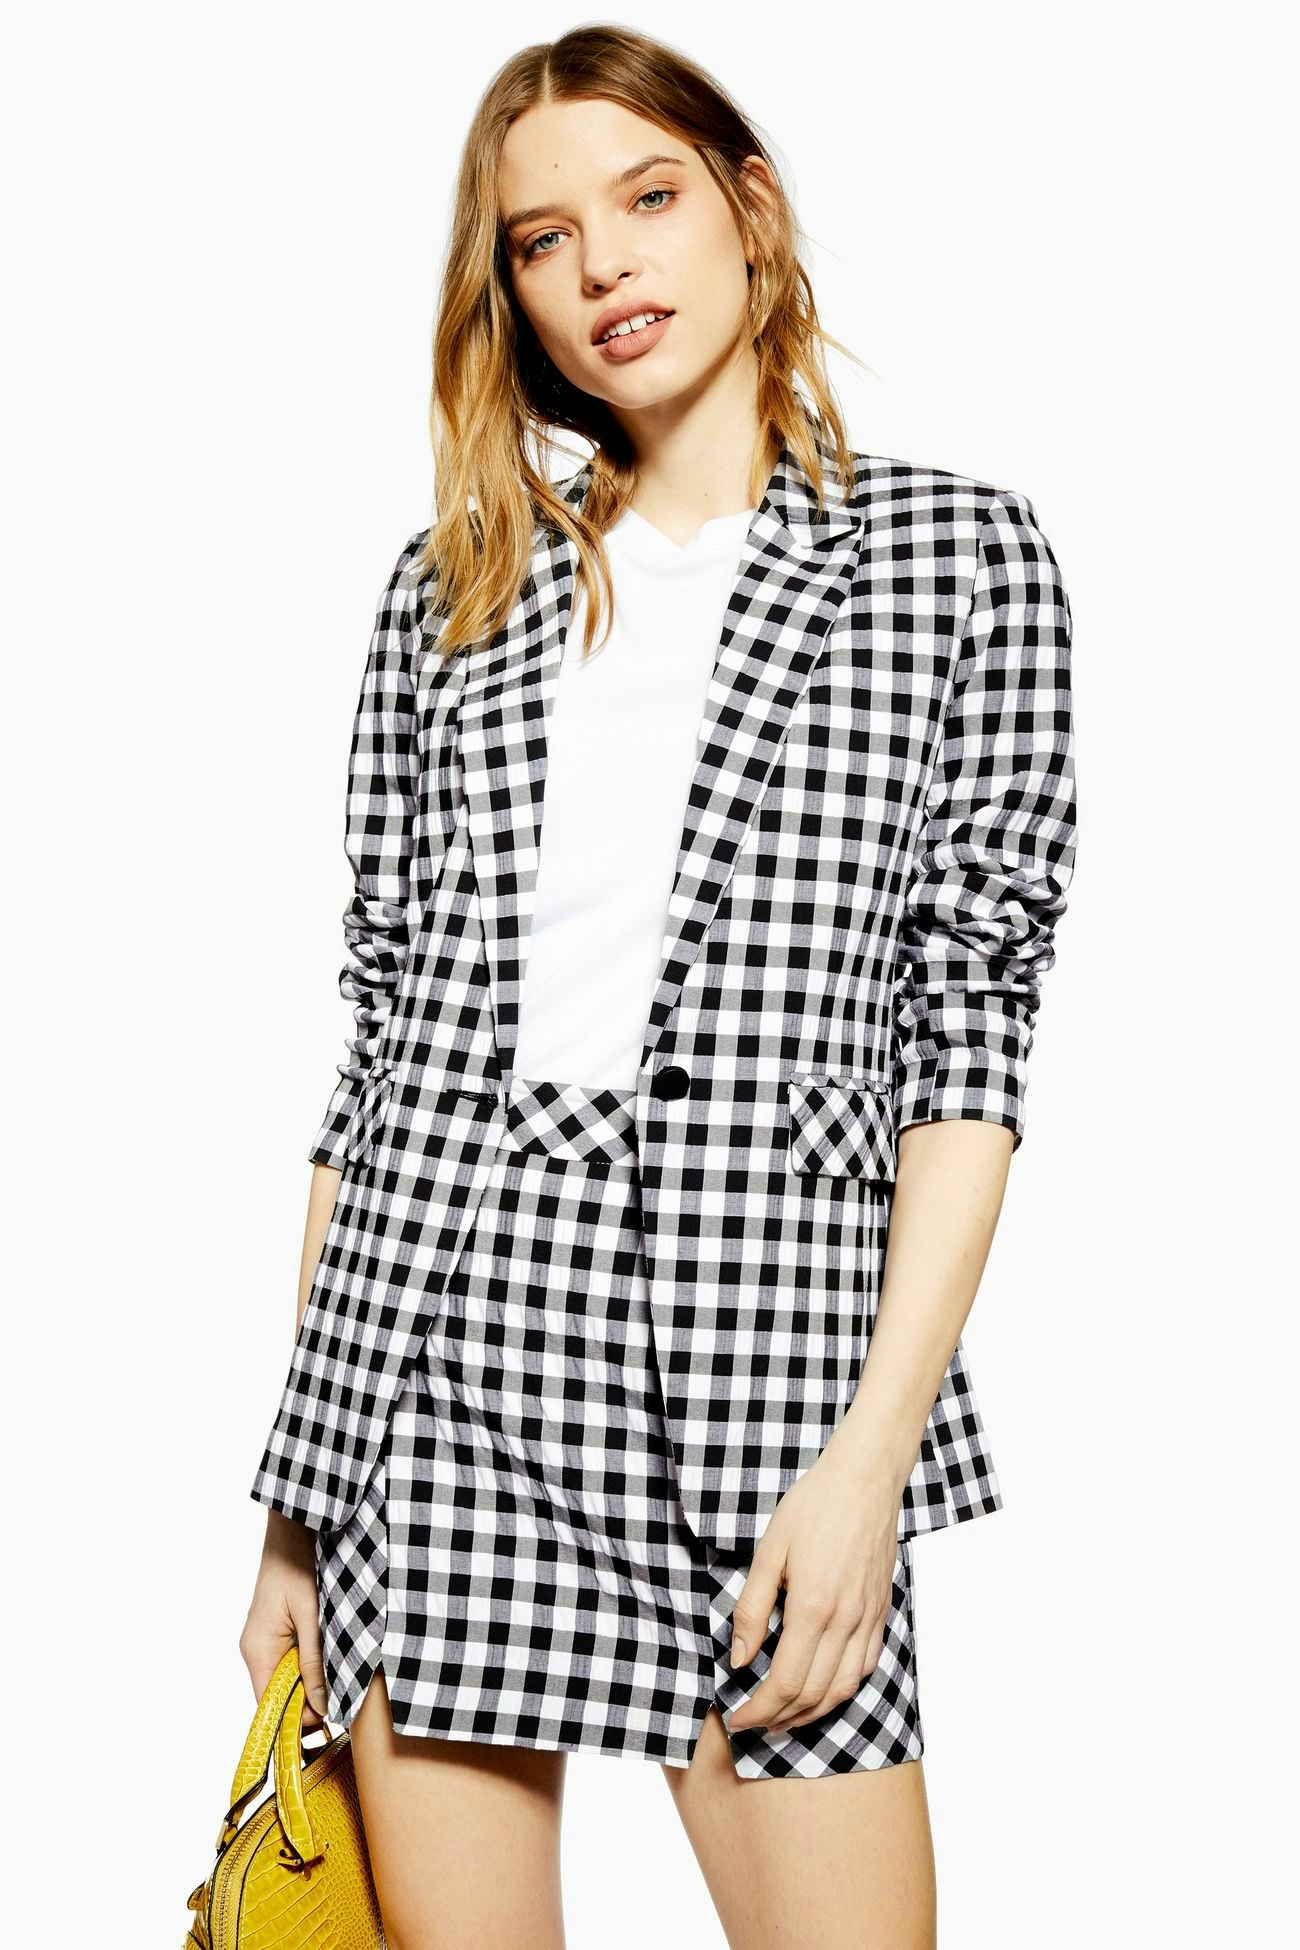 Workwear/Office looks coming up! Gingham edition 🤣 I am in a small  in everything! Say A102 for outfit deets sent to you or head over to my   Storefront (🔗ONPROFILE) #workwear #